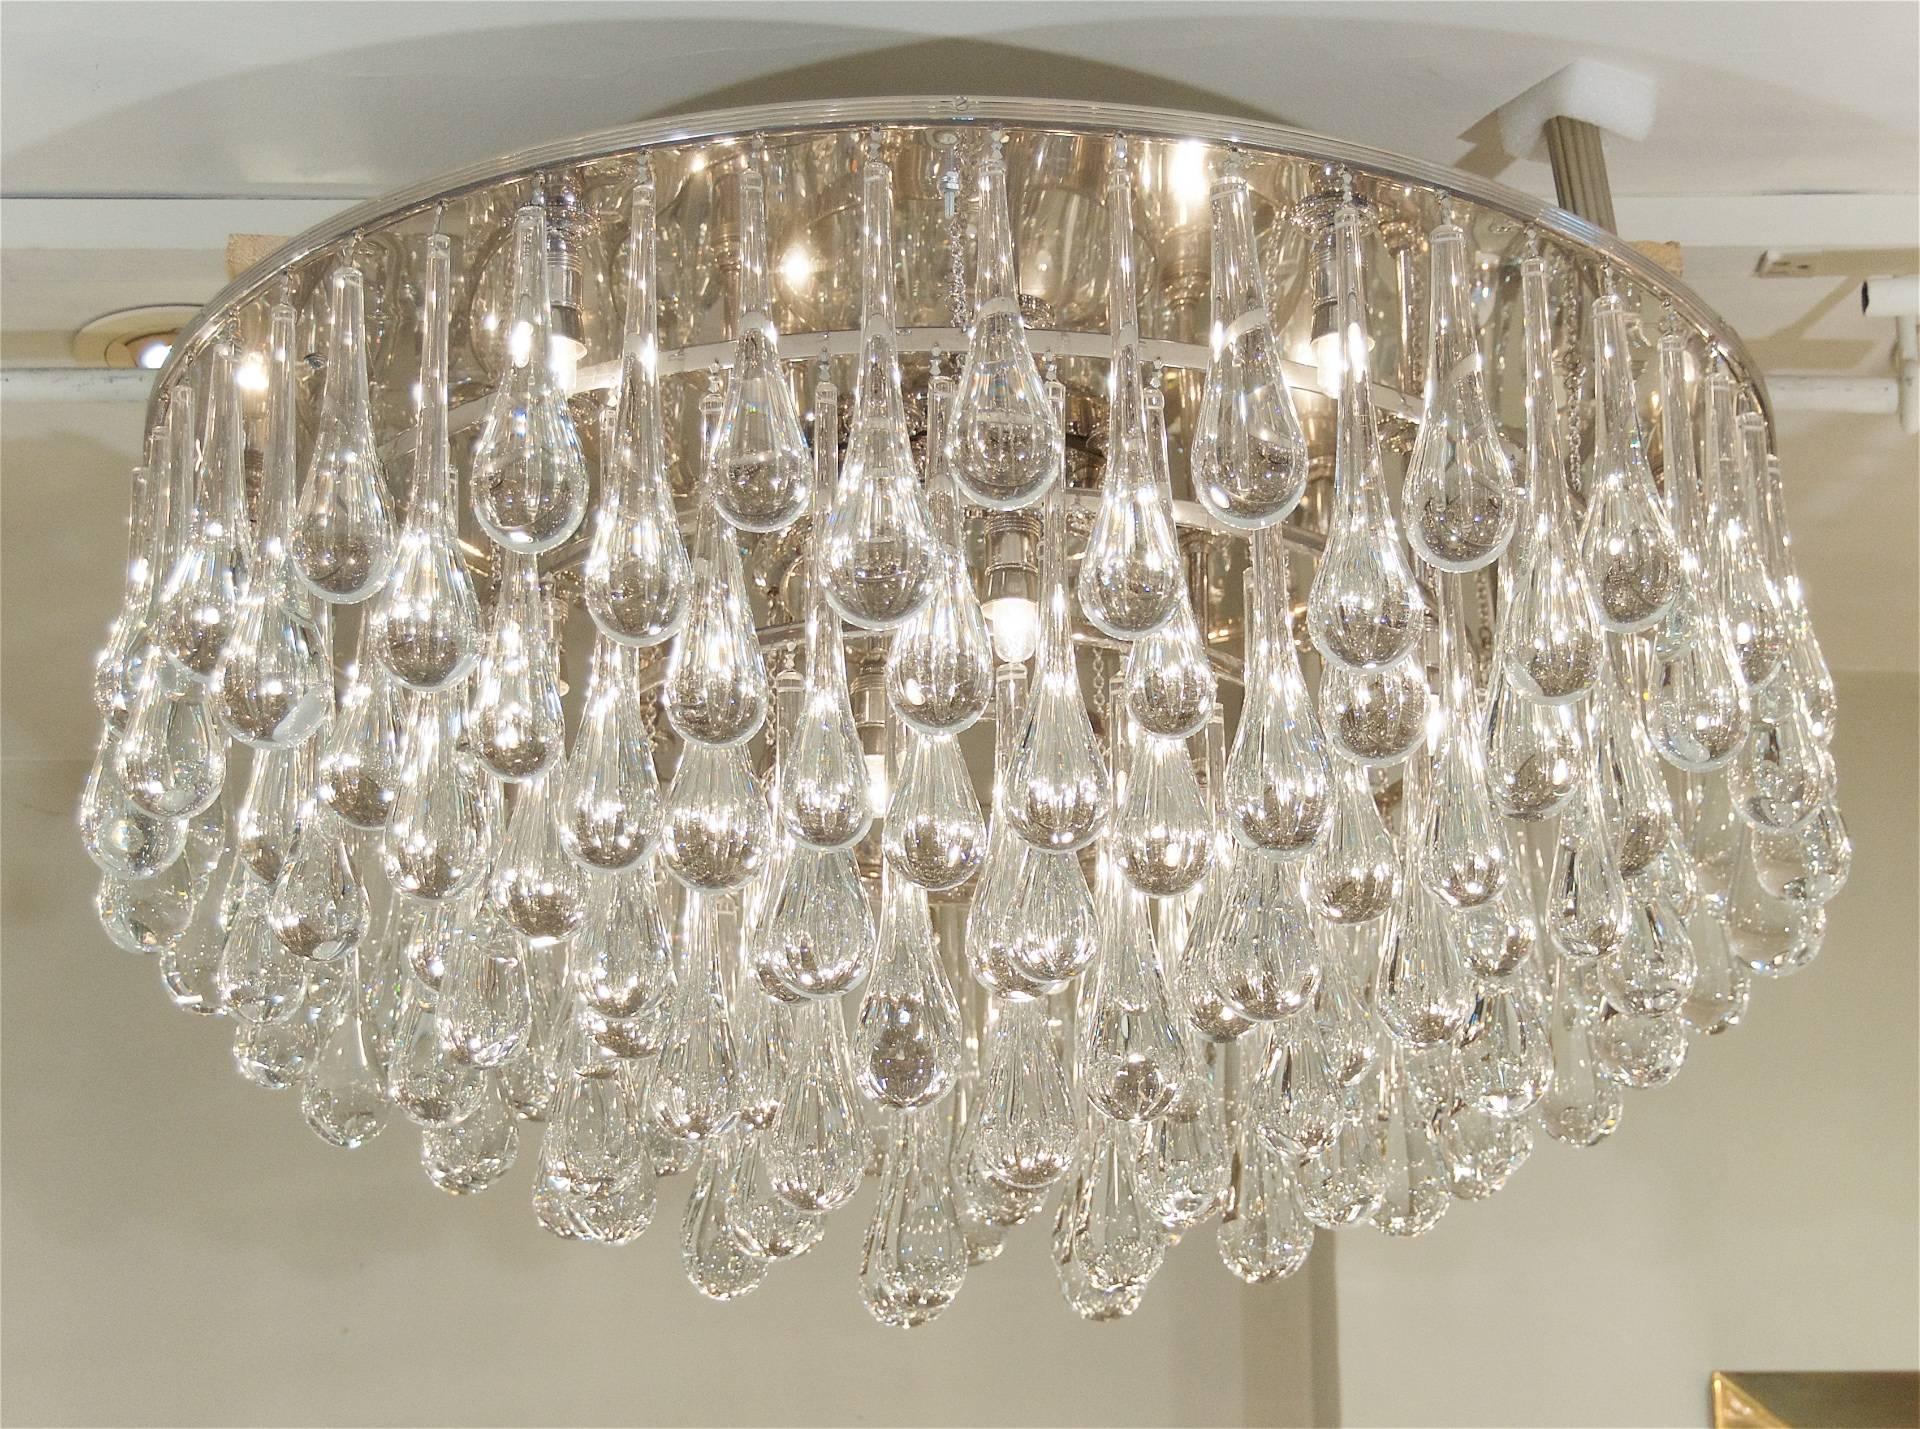 Huge round flush mount chandelier by Christophe Palme, with massive (2